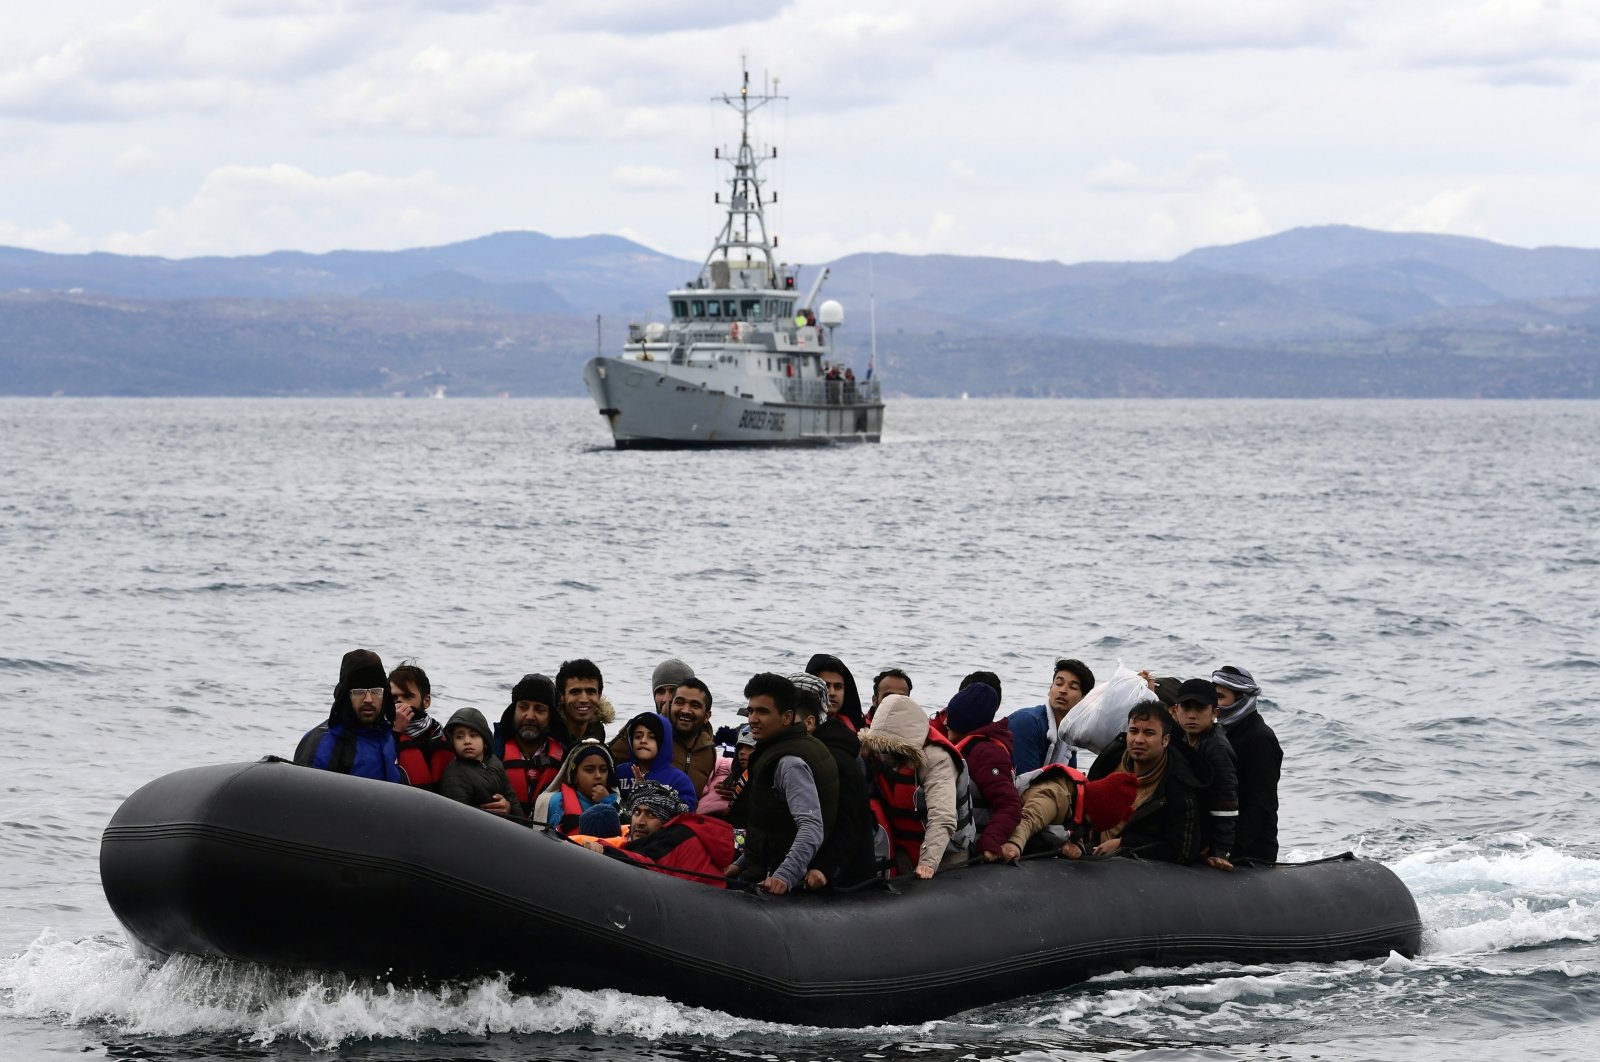 Migrants arrive in a dinghy accompanied by a Frontex vessel at the village of Skala Sikaminias on the island of Lesbos, Greece, Feb. 28, 2020. (AP Photo)